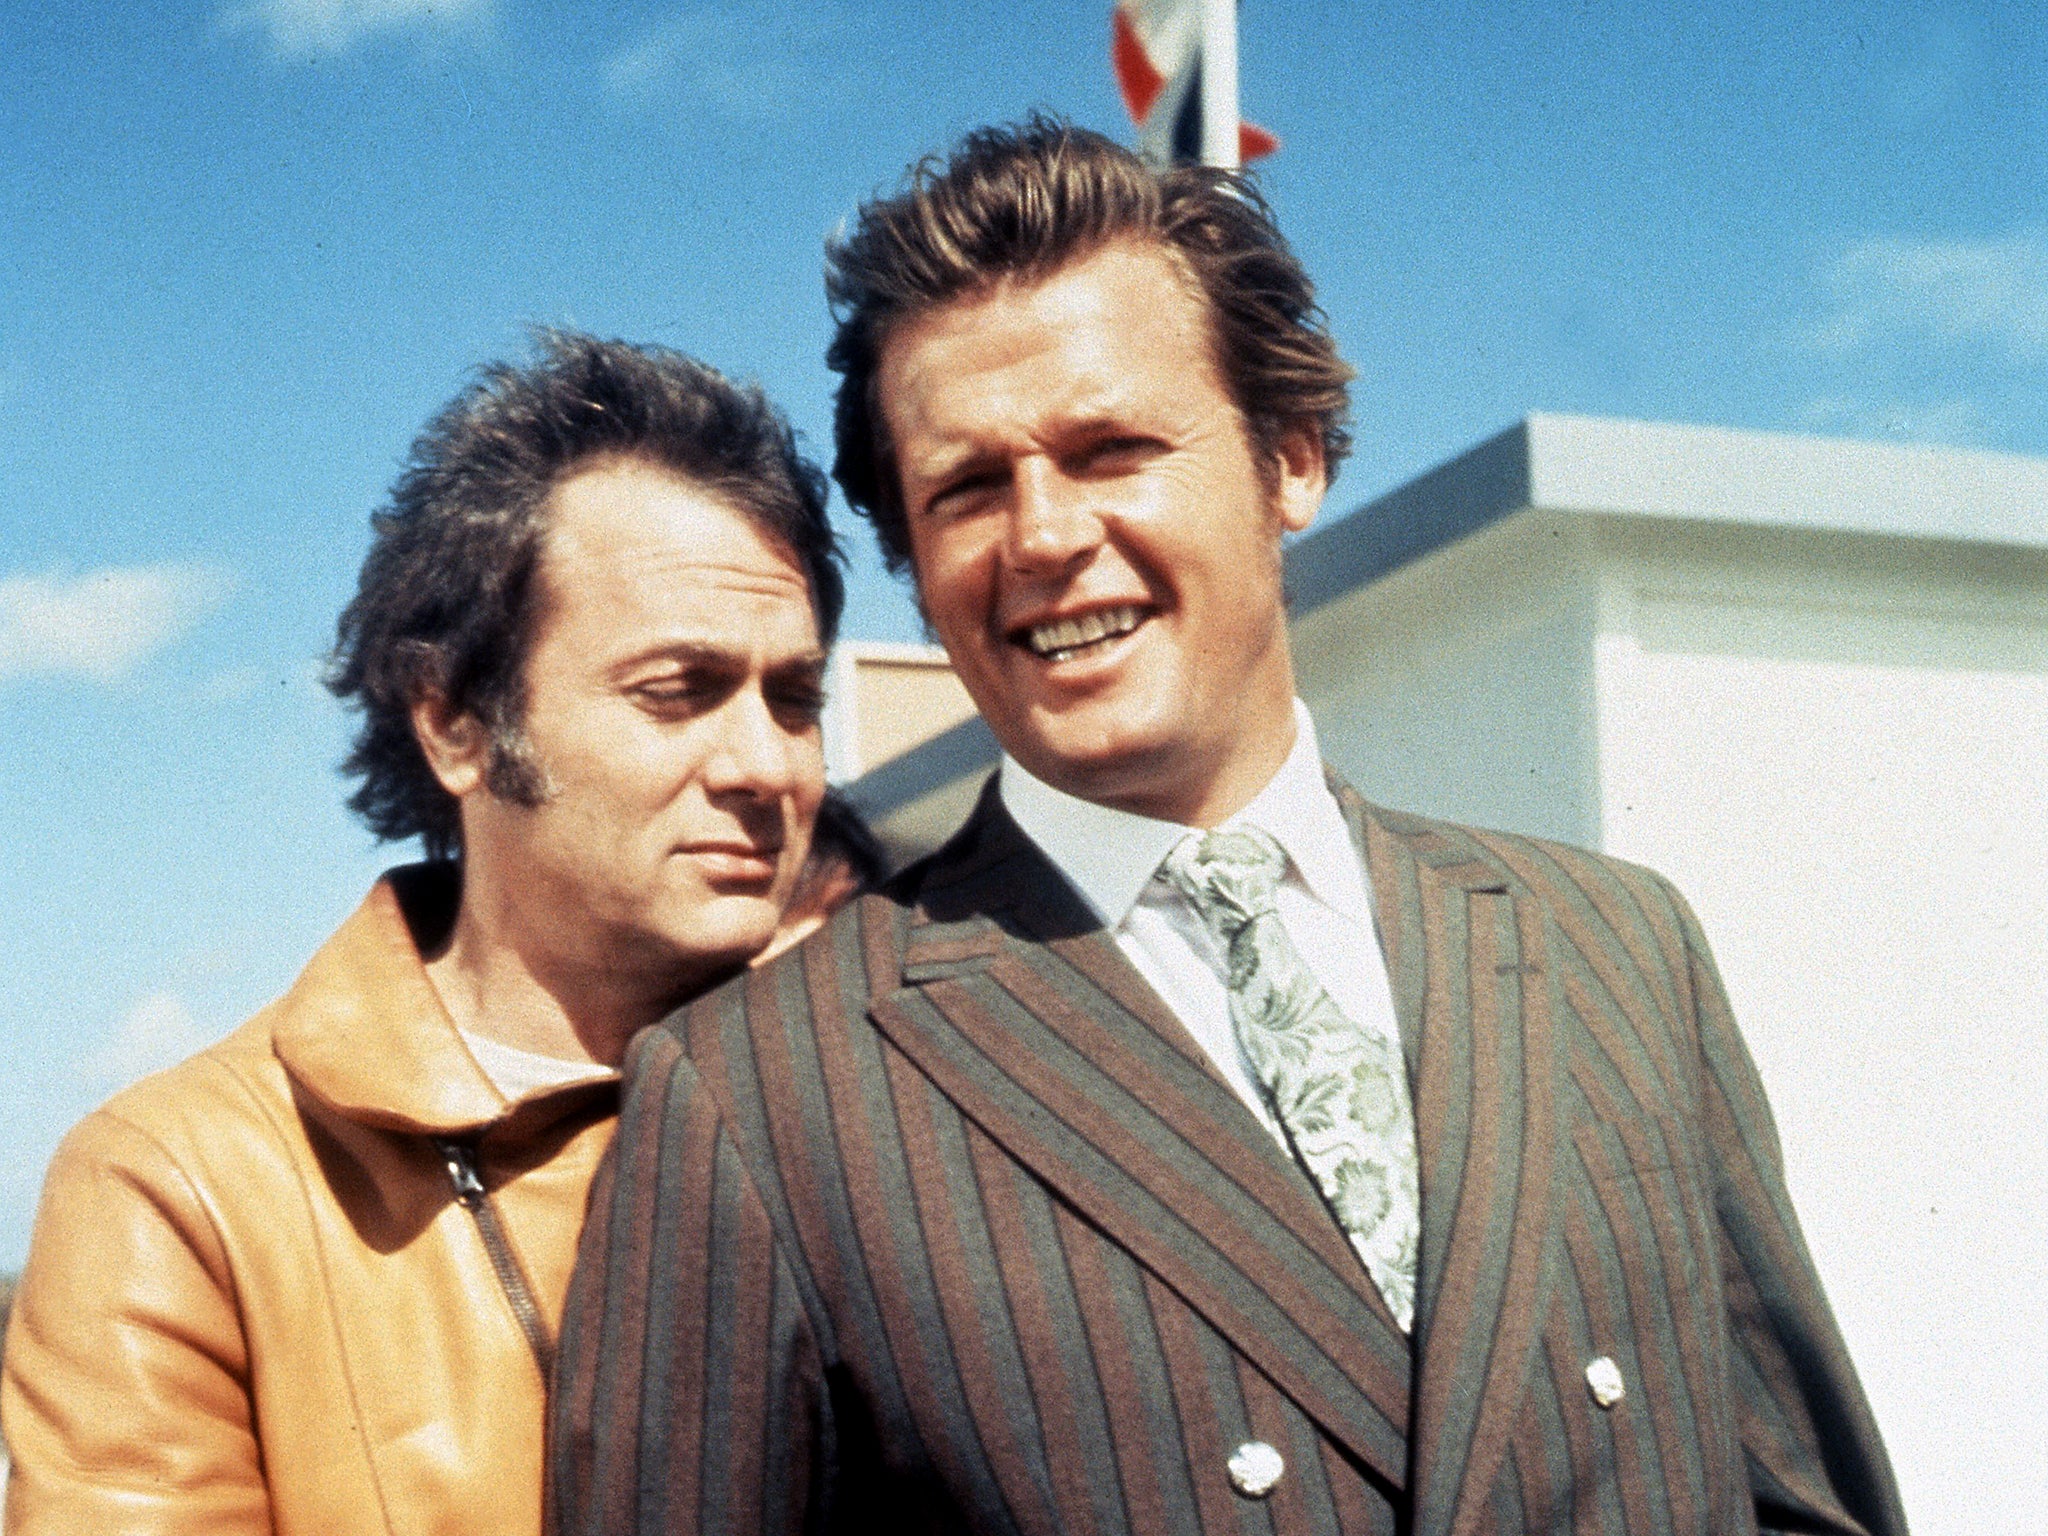 Tony Curtis (left) with Roger Moore (right) in hit TV series ‘The Persuaders!’